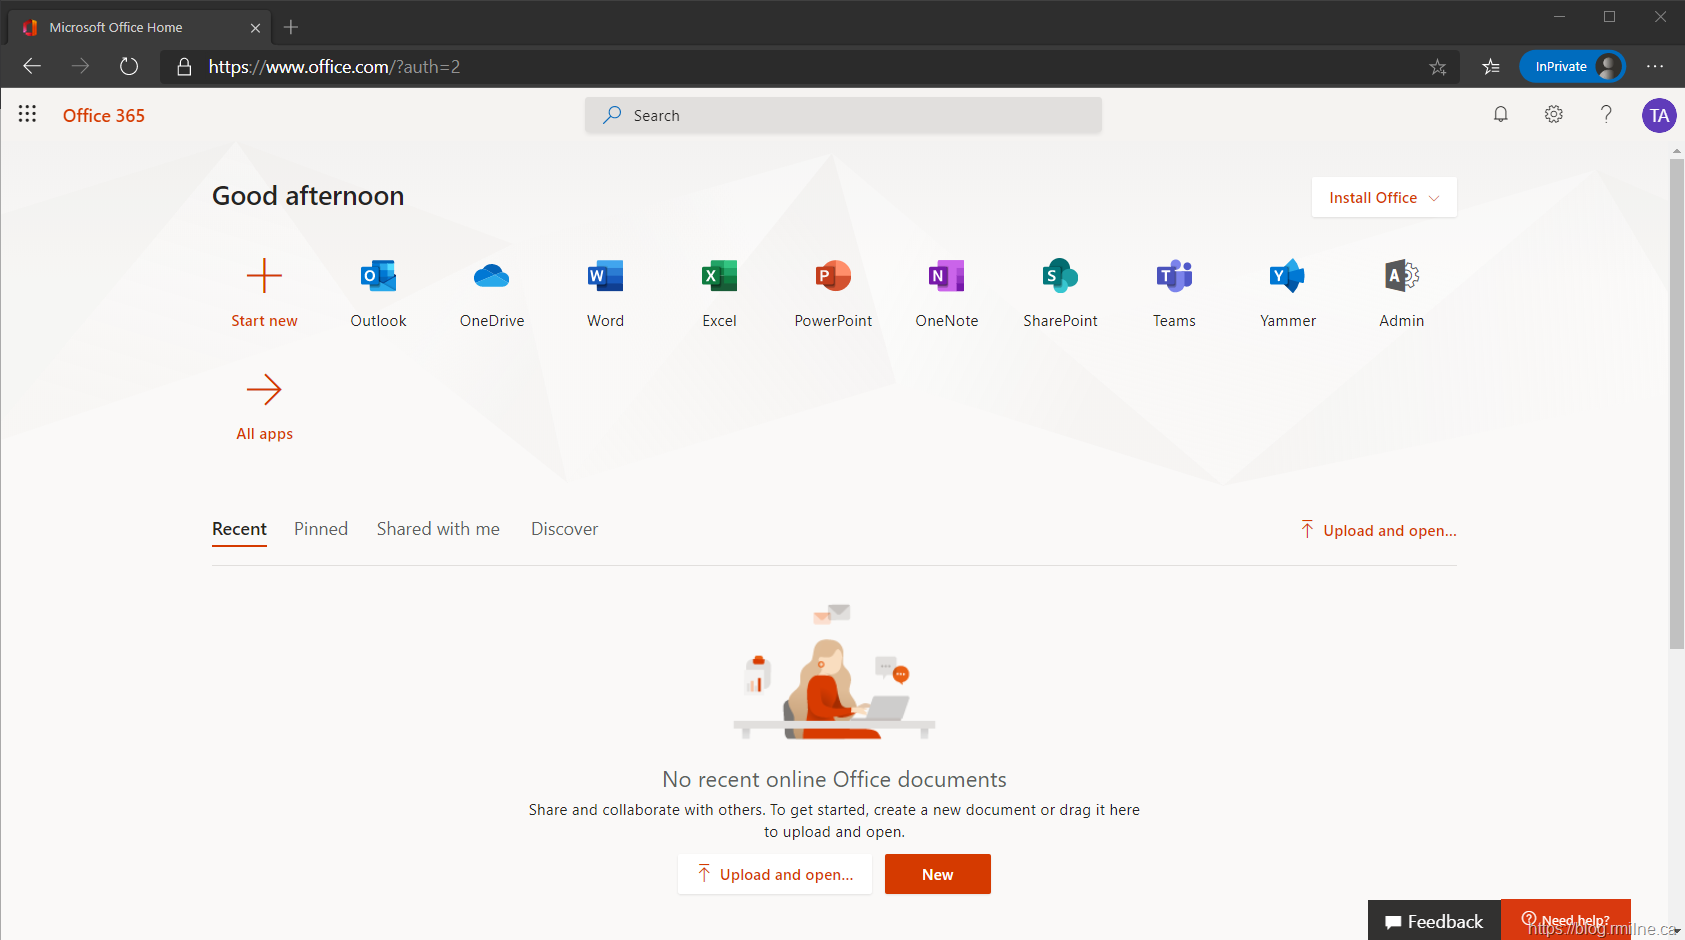 download office 365 admin